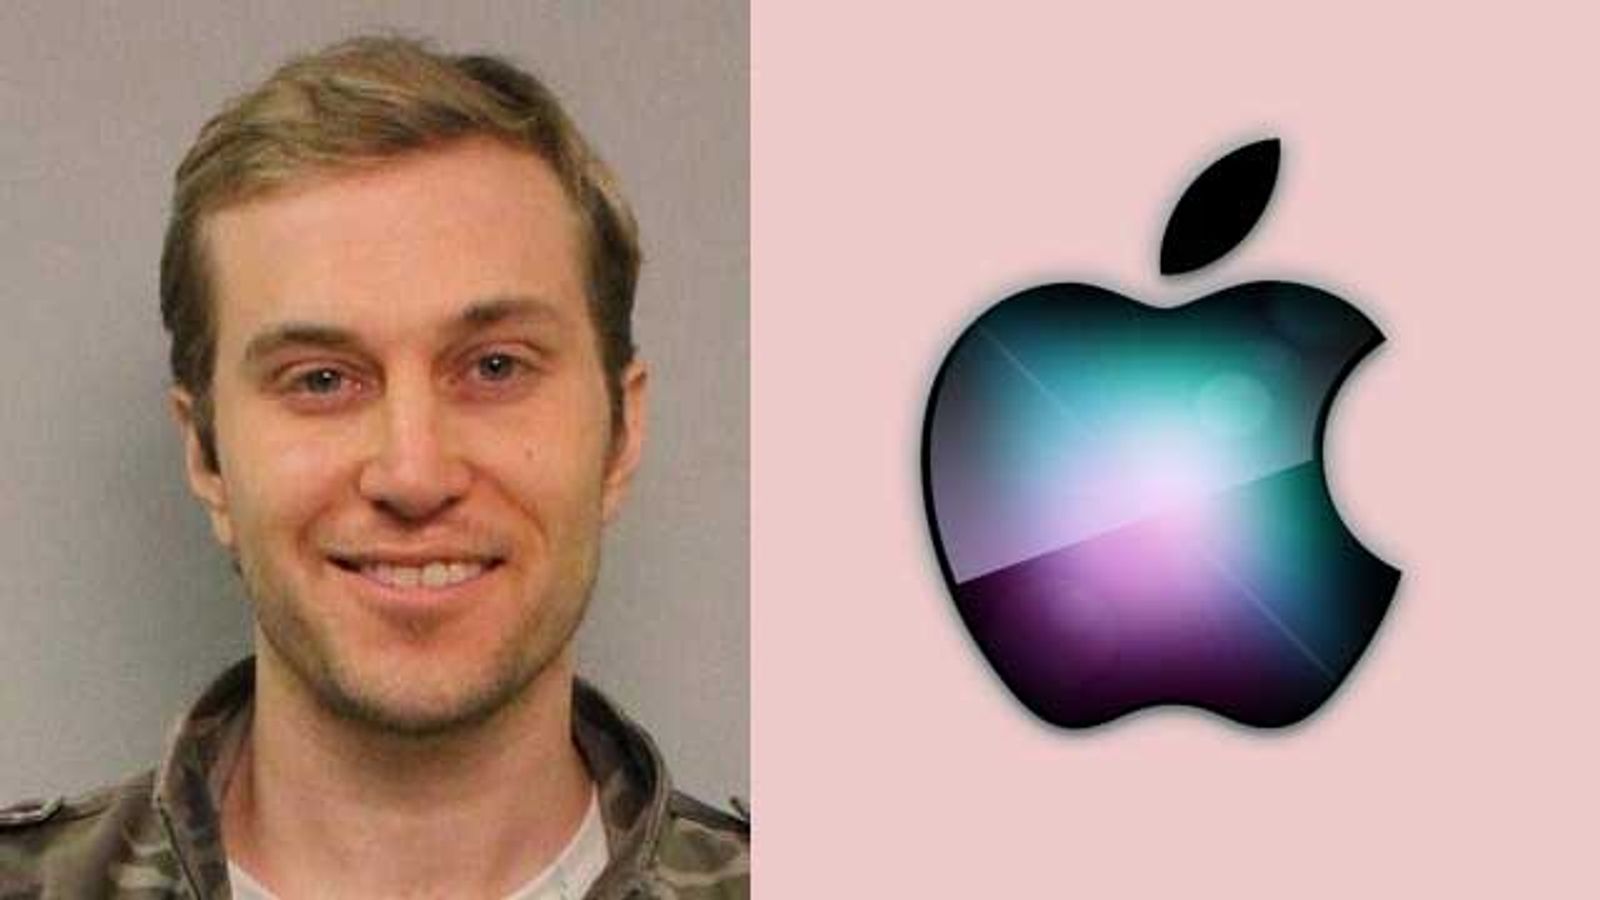 Lawyer Sues Apple for Not Blocking Porn